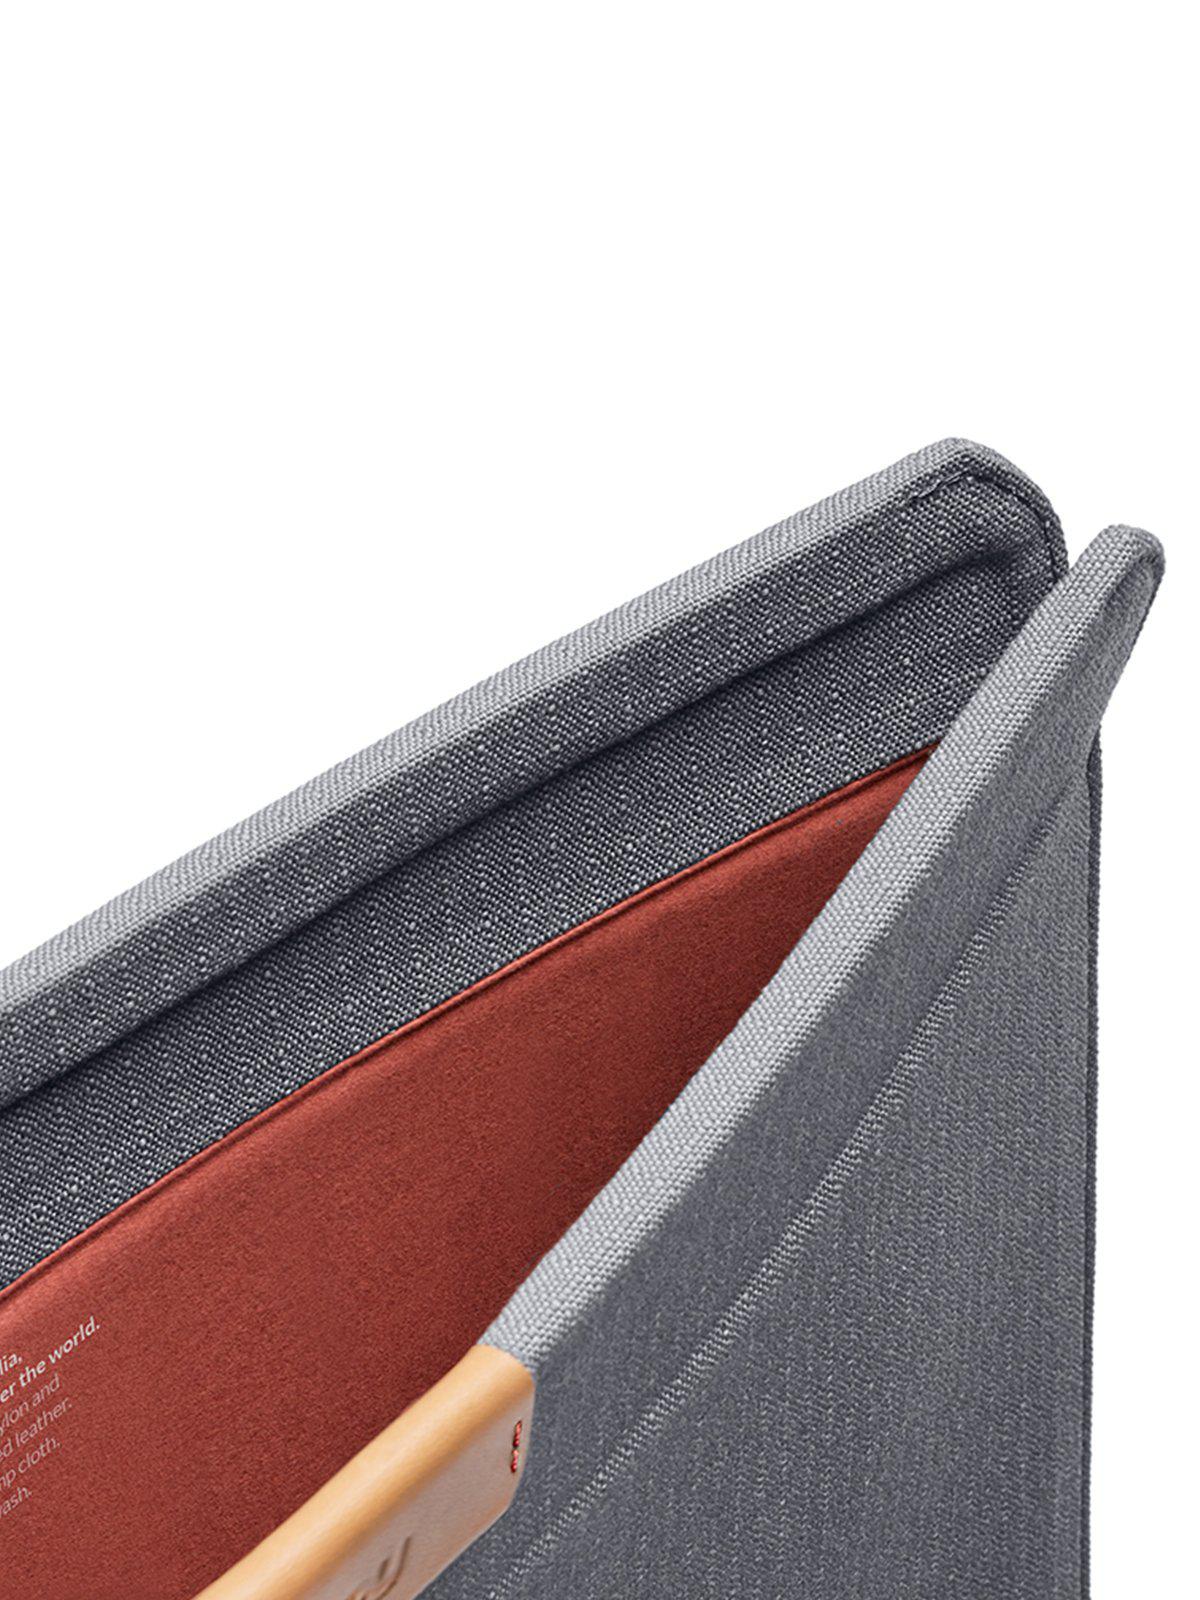 Bellroy Laptop Sleeve 15 Inch Light Grey Recycled - MORE by Morello Indonesia